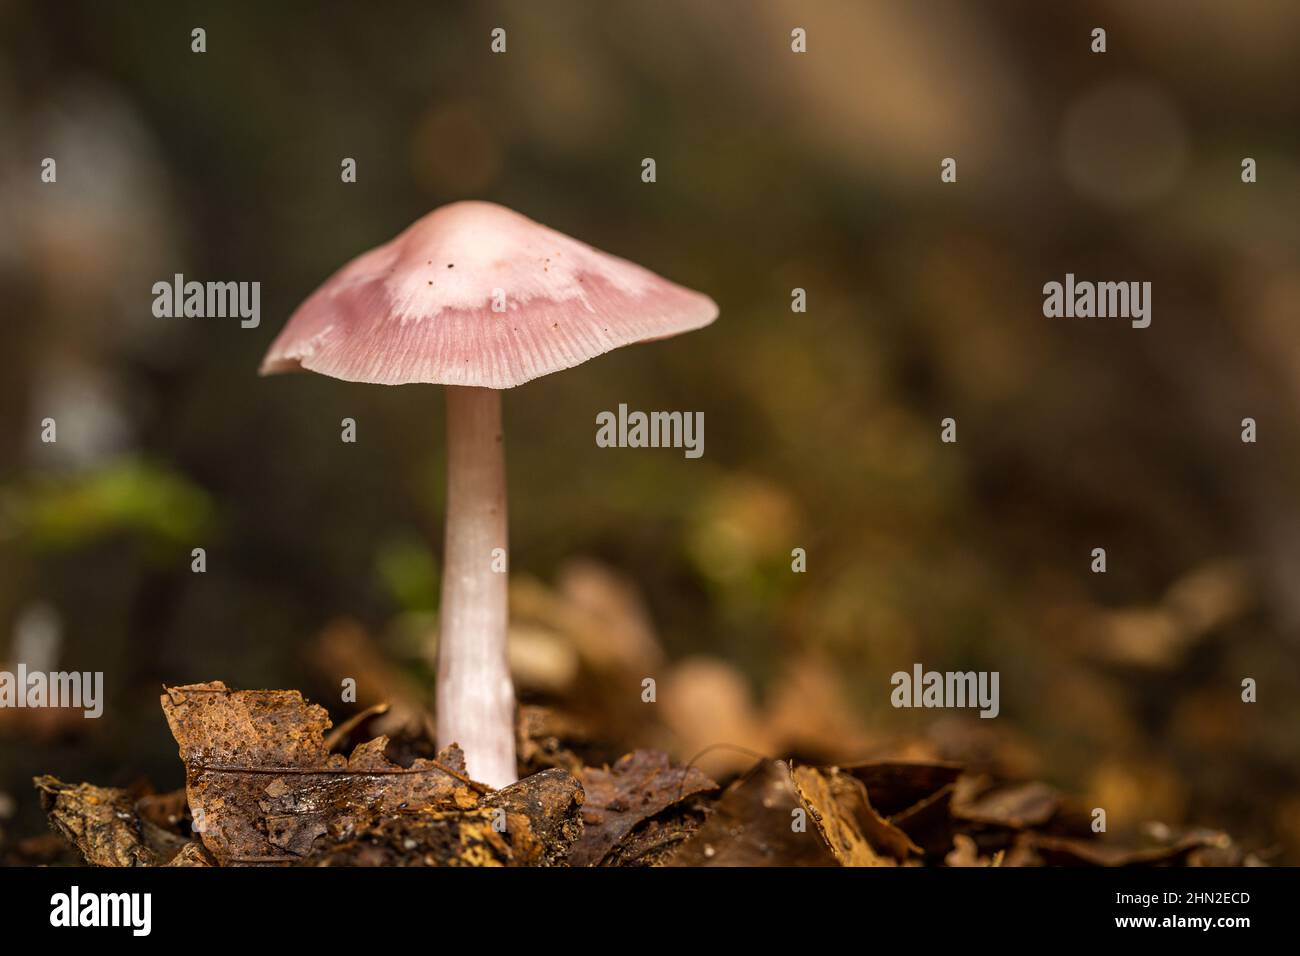 Fungus in a woodland area Stock Photo